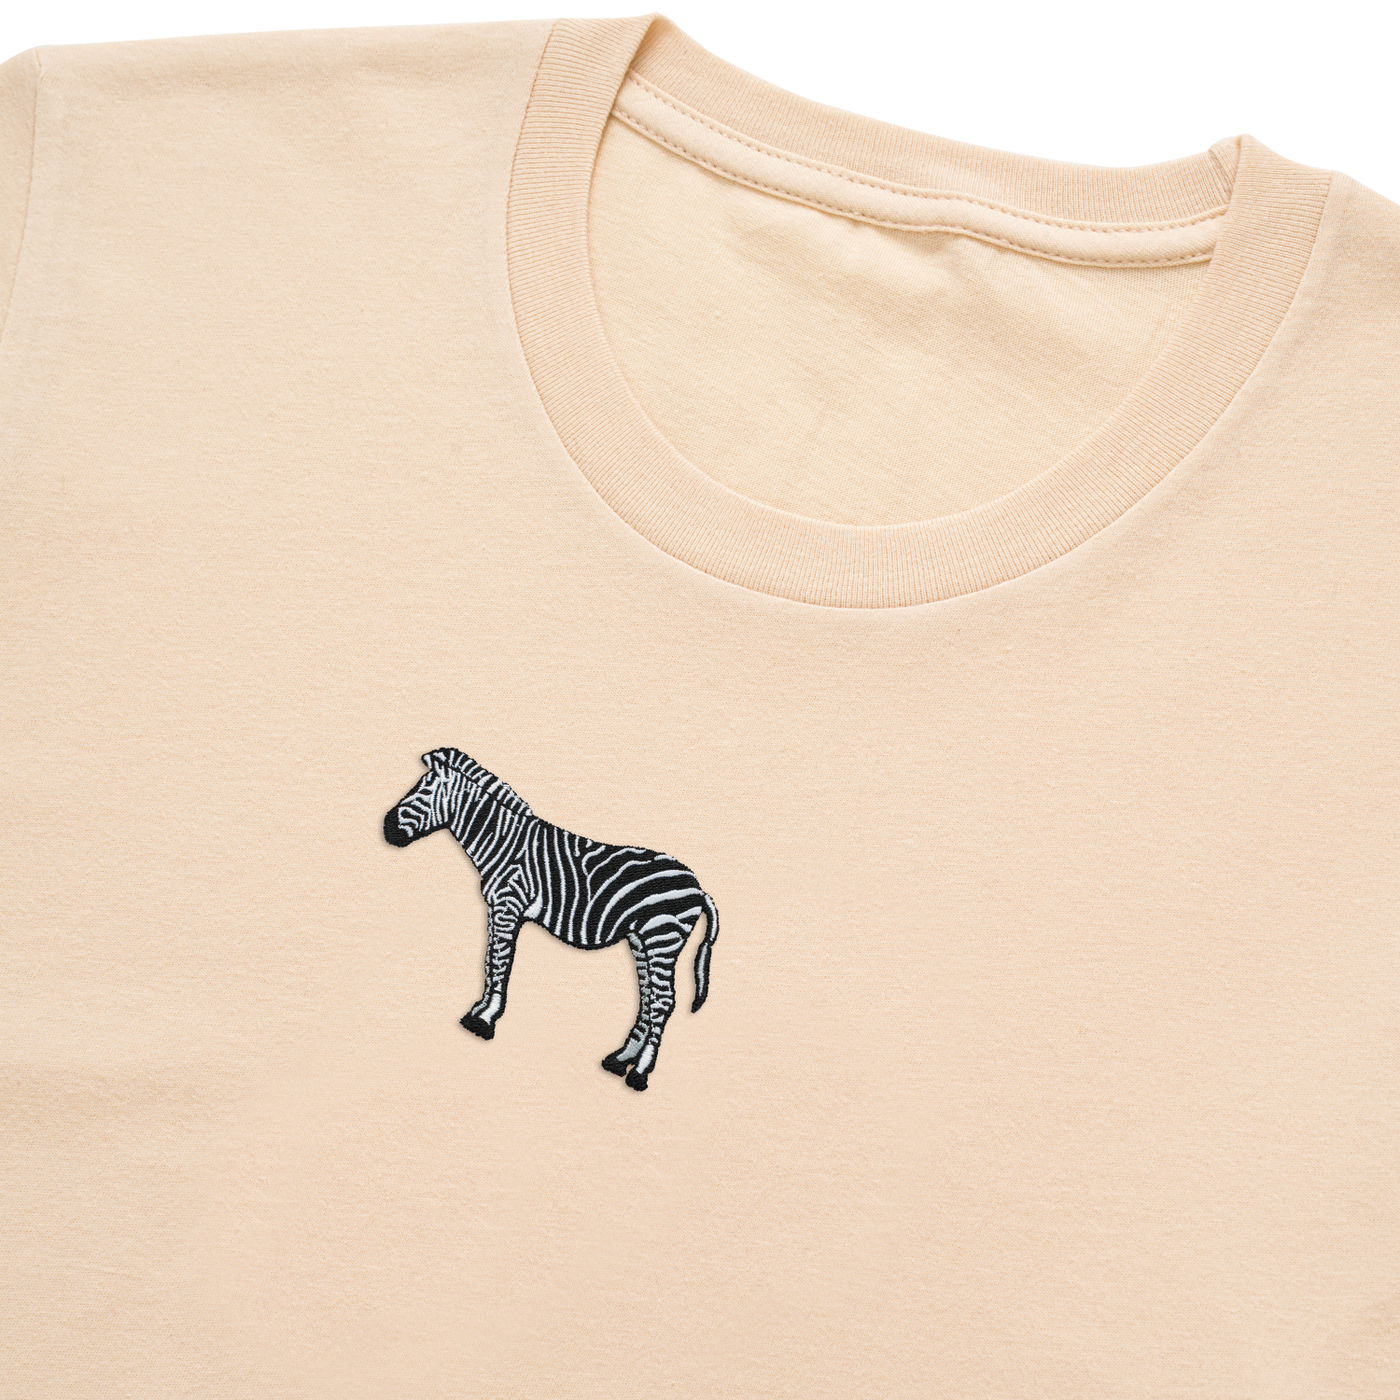 Bobby's Planet Women's Embroidered Zebra T-Shirt from African Animals Collection in Soft Cream Color#color_soft-cream